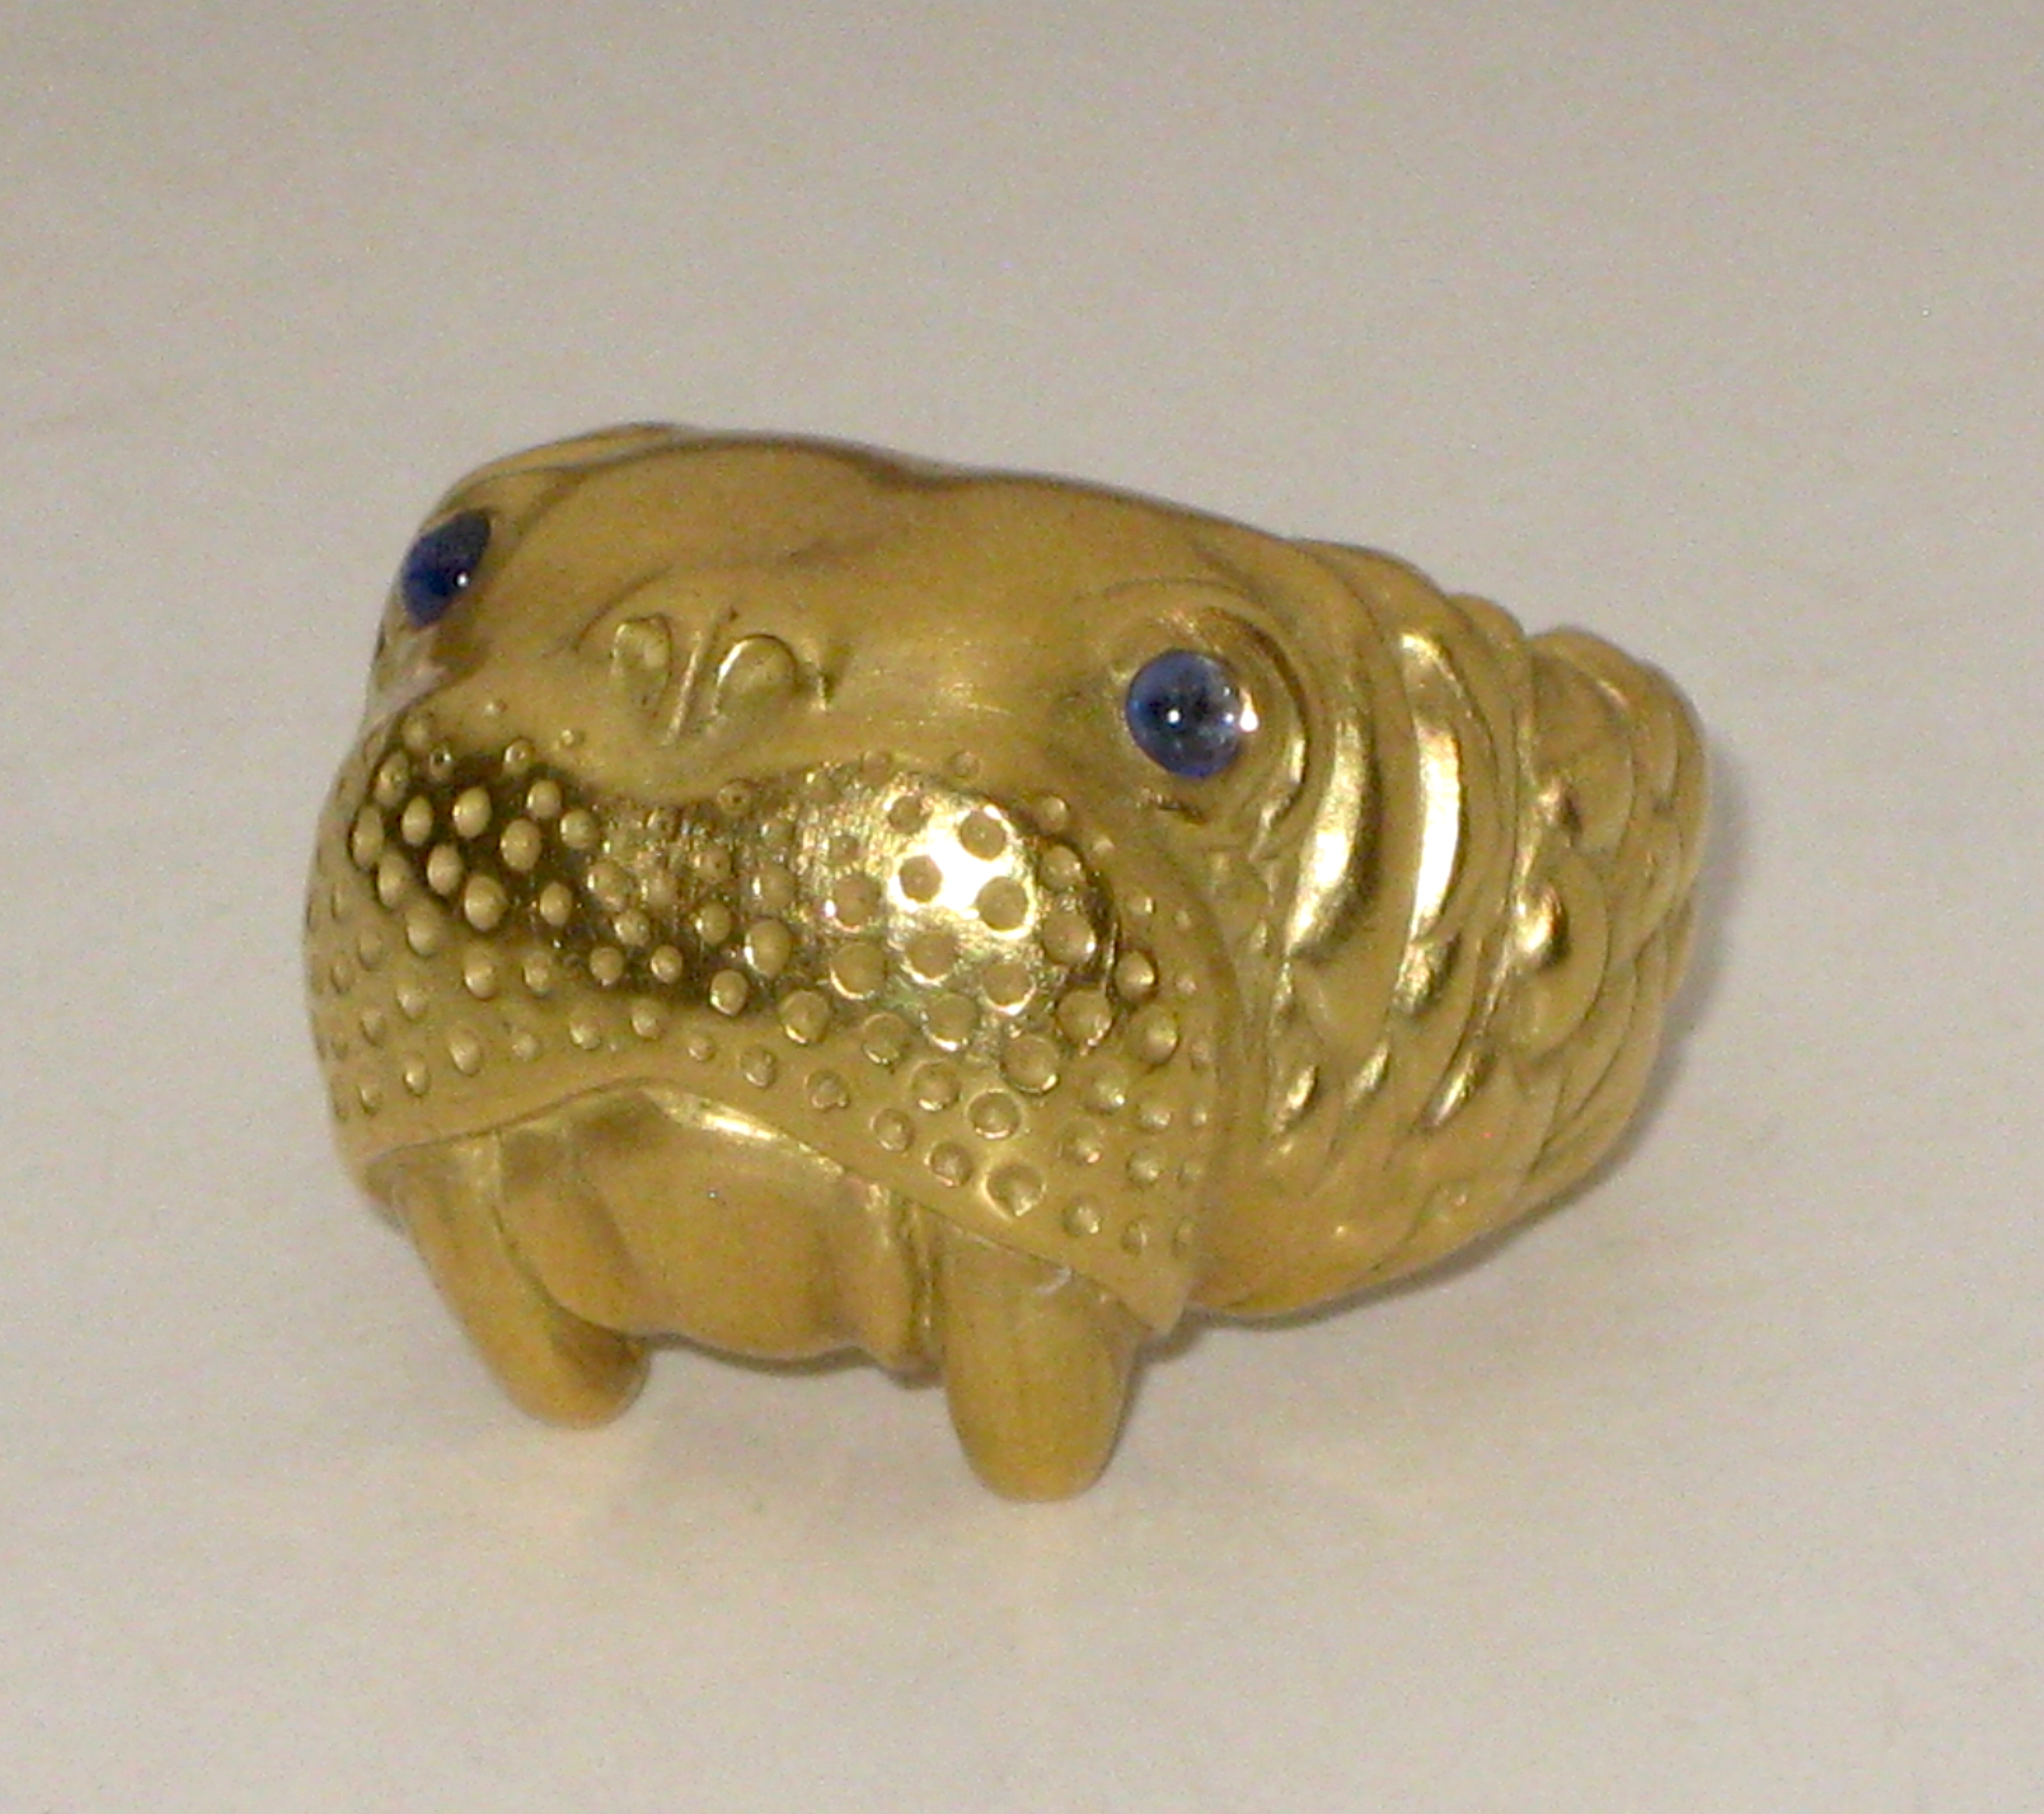 Angela Cummings “Walrus” ring, 18K gold set with cabochon sapphire eyes, signed, 1995